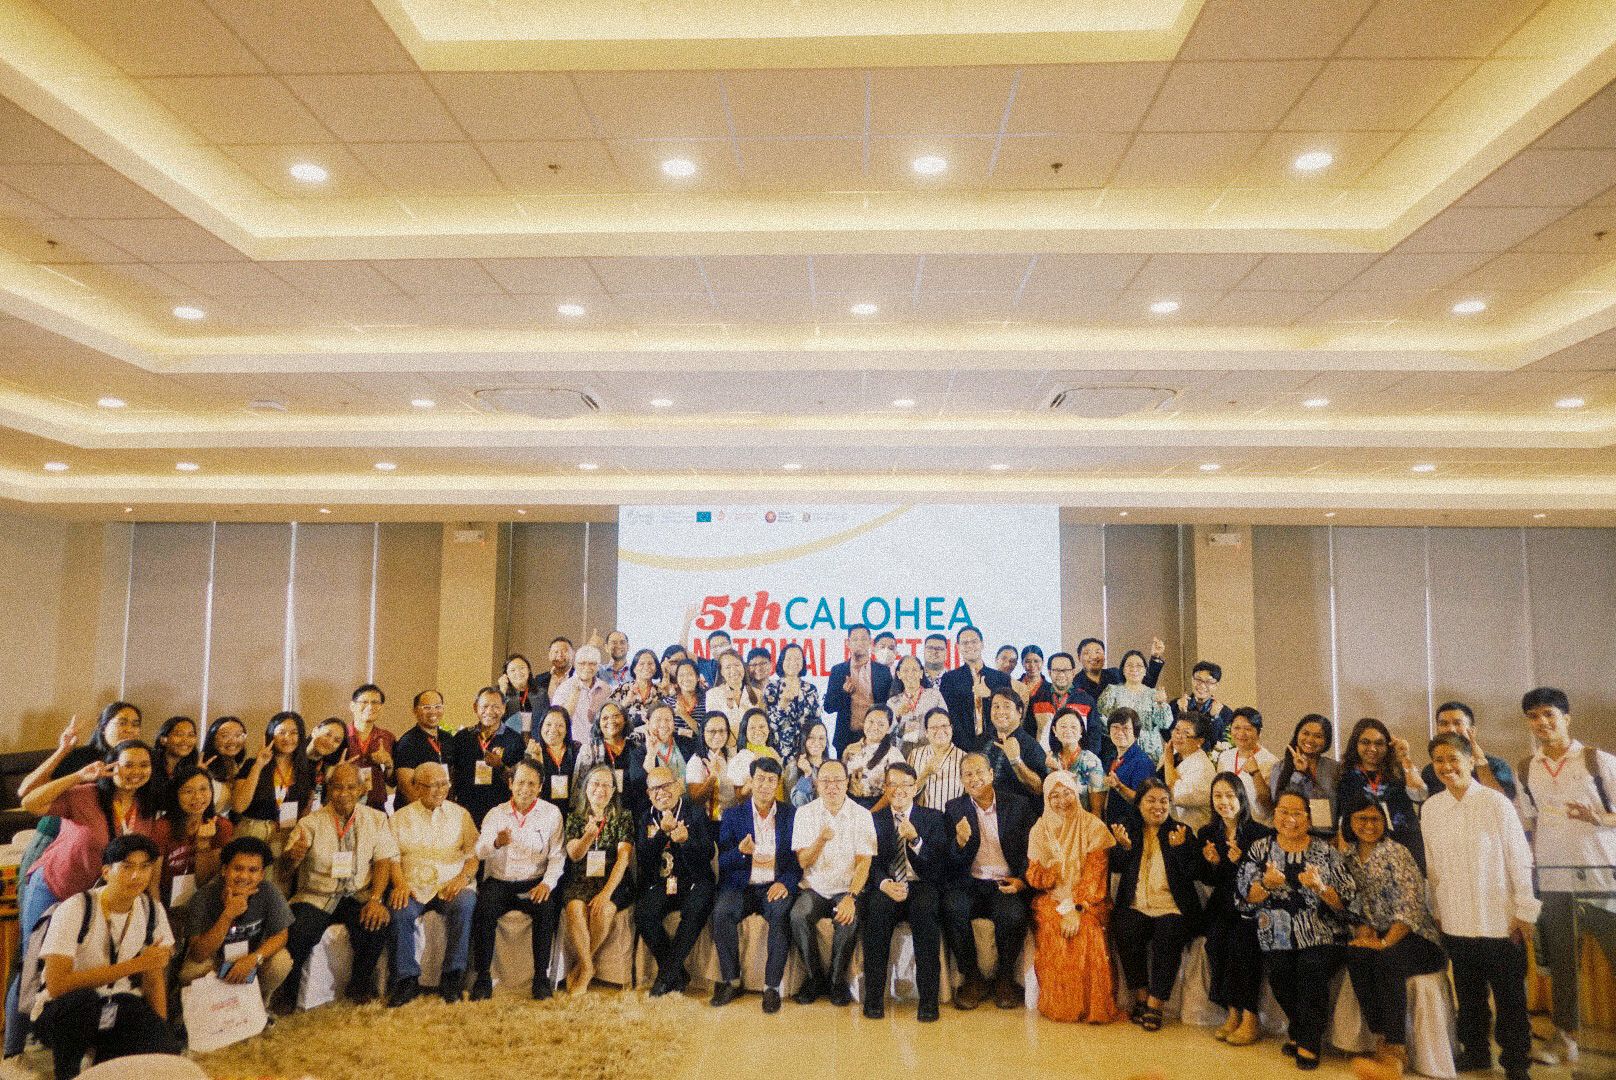 Philippine Higher Education Institutions Tackled Student Mobility and Internationalisation Challenges in the 5th CALOHEA National Meeting at the University of San Agustin